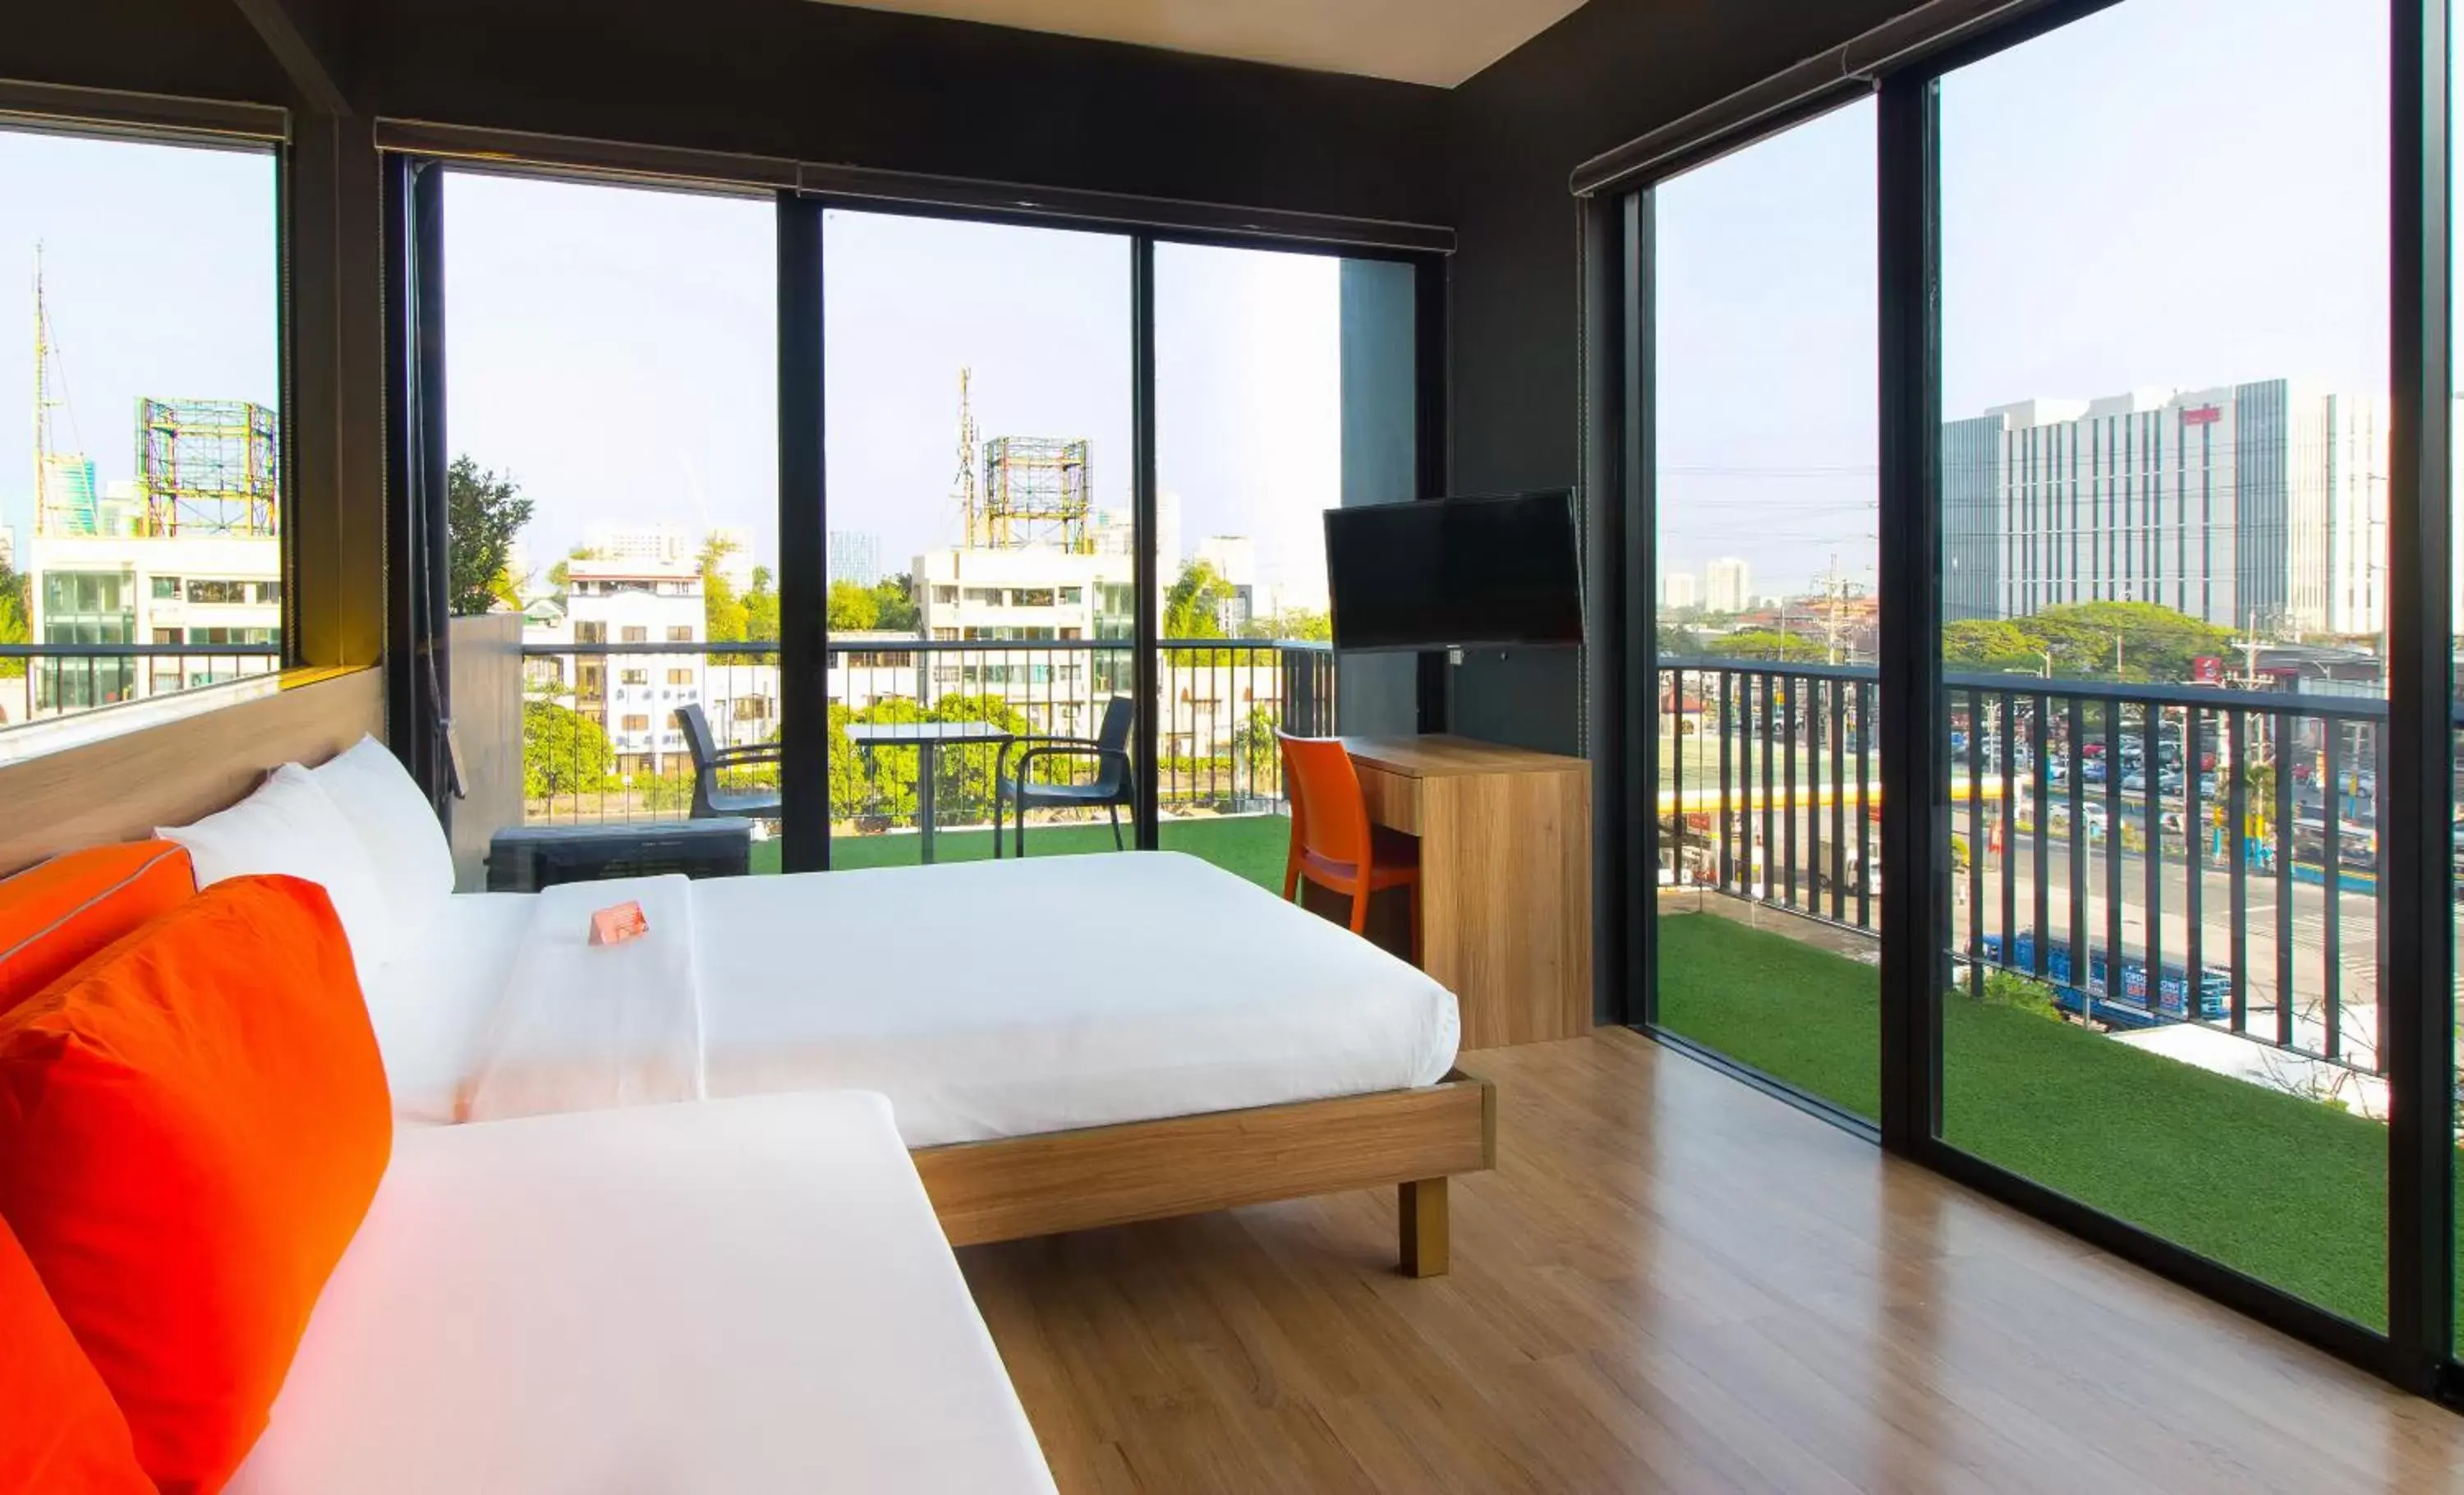 Balcony/Terrace in Azumi Boutique Hotel, Multiple Use Hotel Staycation Approved